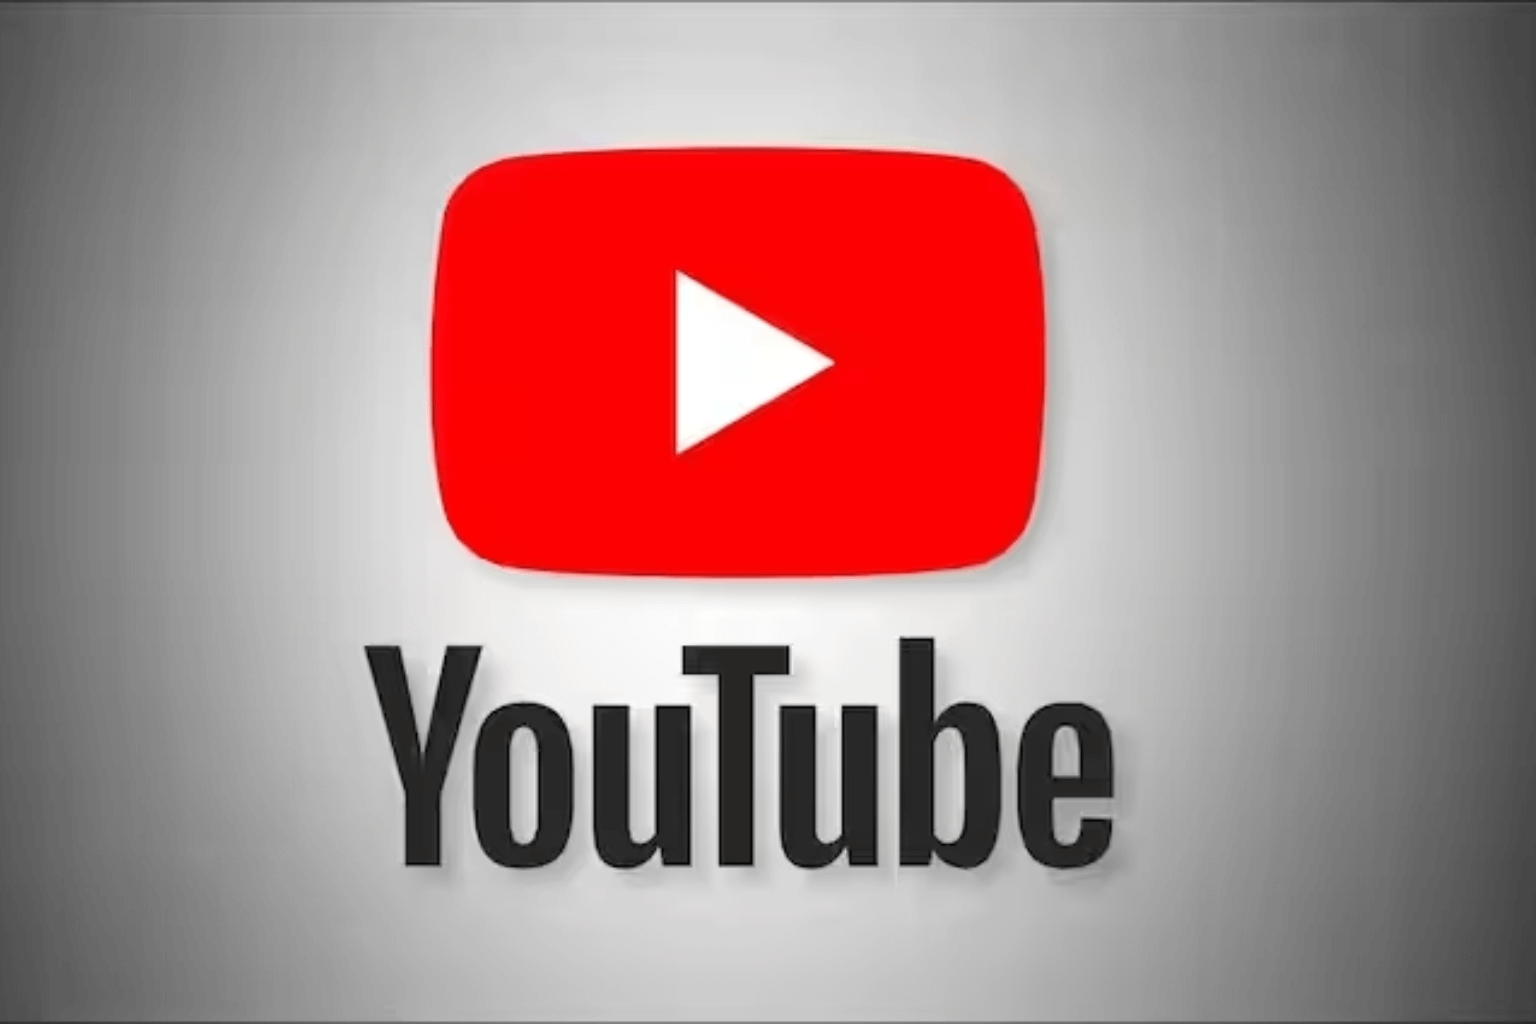 YouTube is Negotiating to work on AI music deals with top record labels